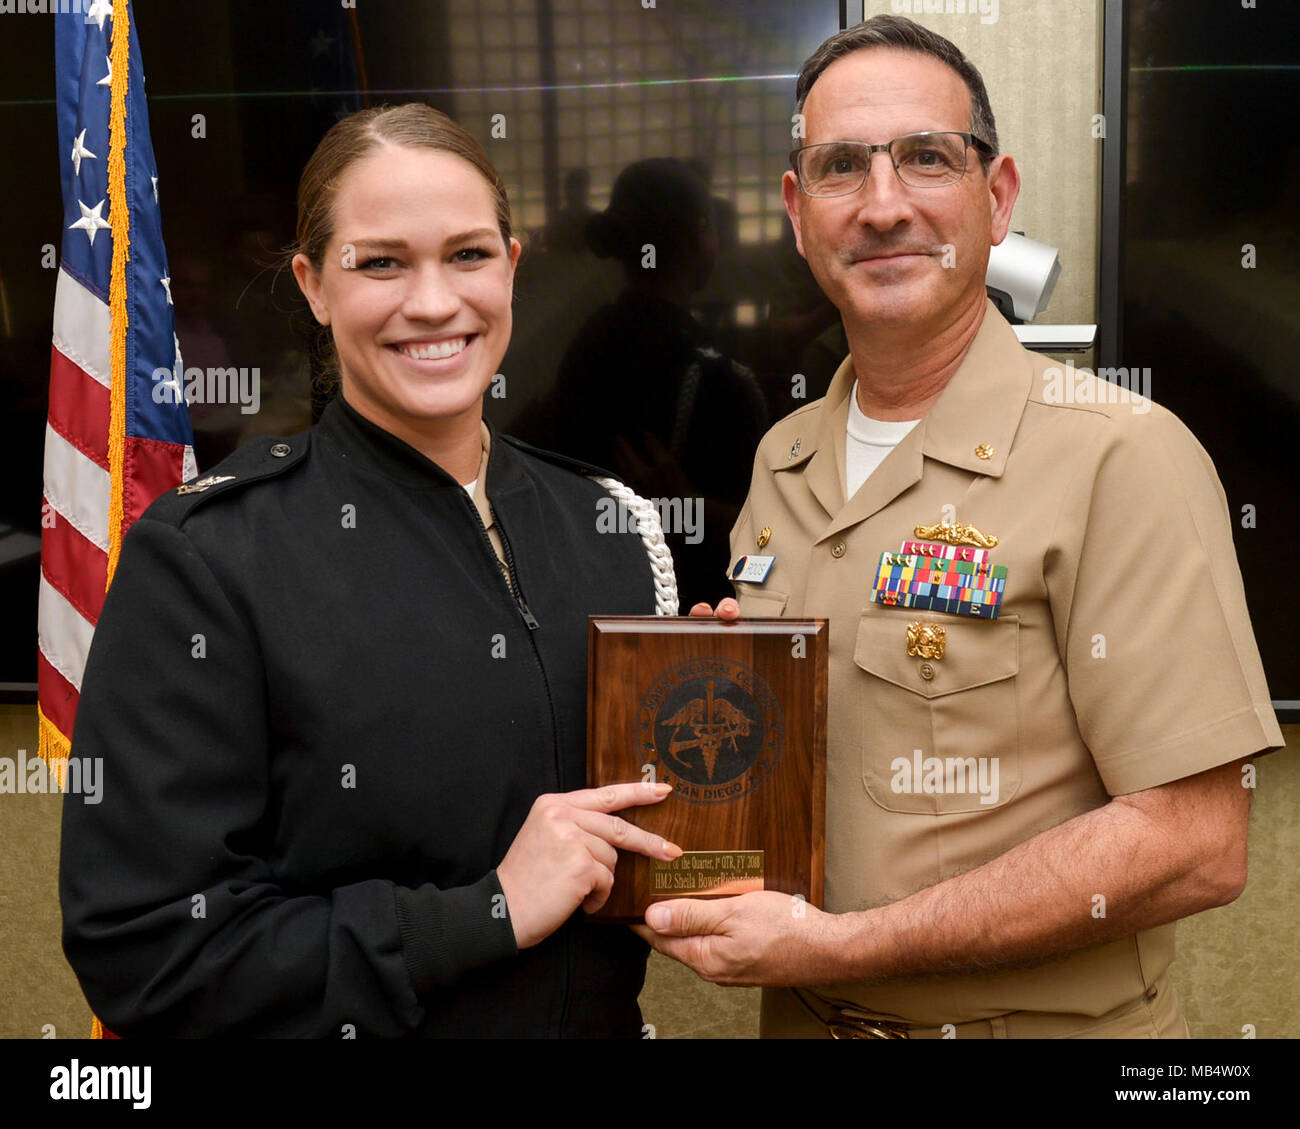 SAN DIEGO (Feb. 16, 2018) CAPT. Joel Roos, Naval Medical Center San Diego Commanding Officer,  presents Hospital Corpsman 2nd Class Shelia BowerRichardson with the Sailor of the Quarter award. H Hospital Corpsman 2nd Class BowerRichardson received the award for her exceptional work and devotion to duty. Stock Photo